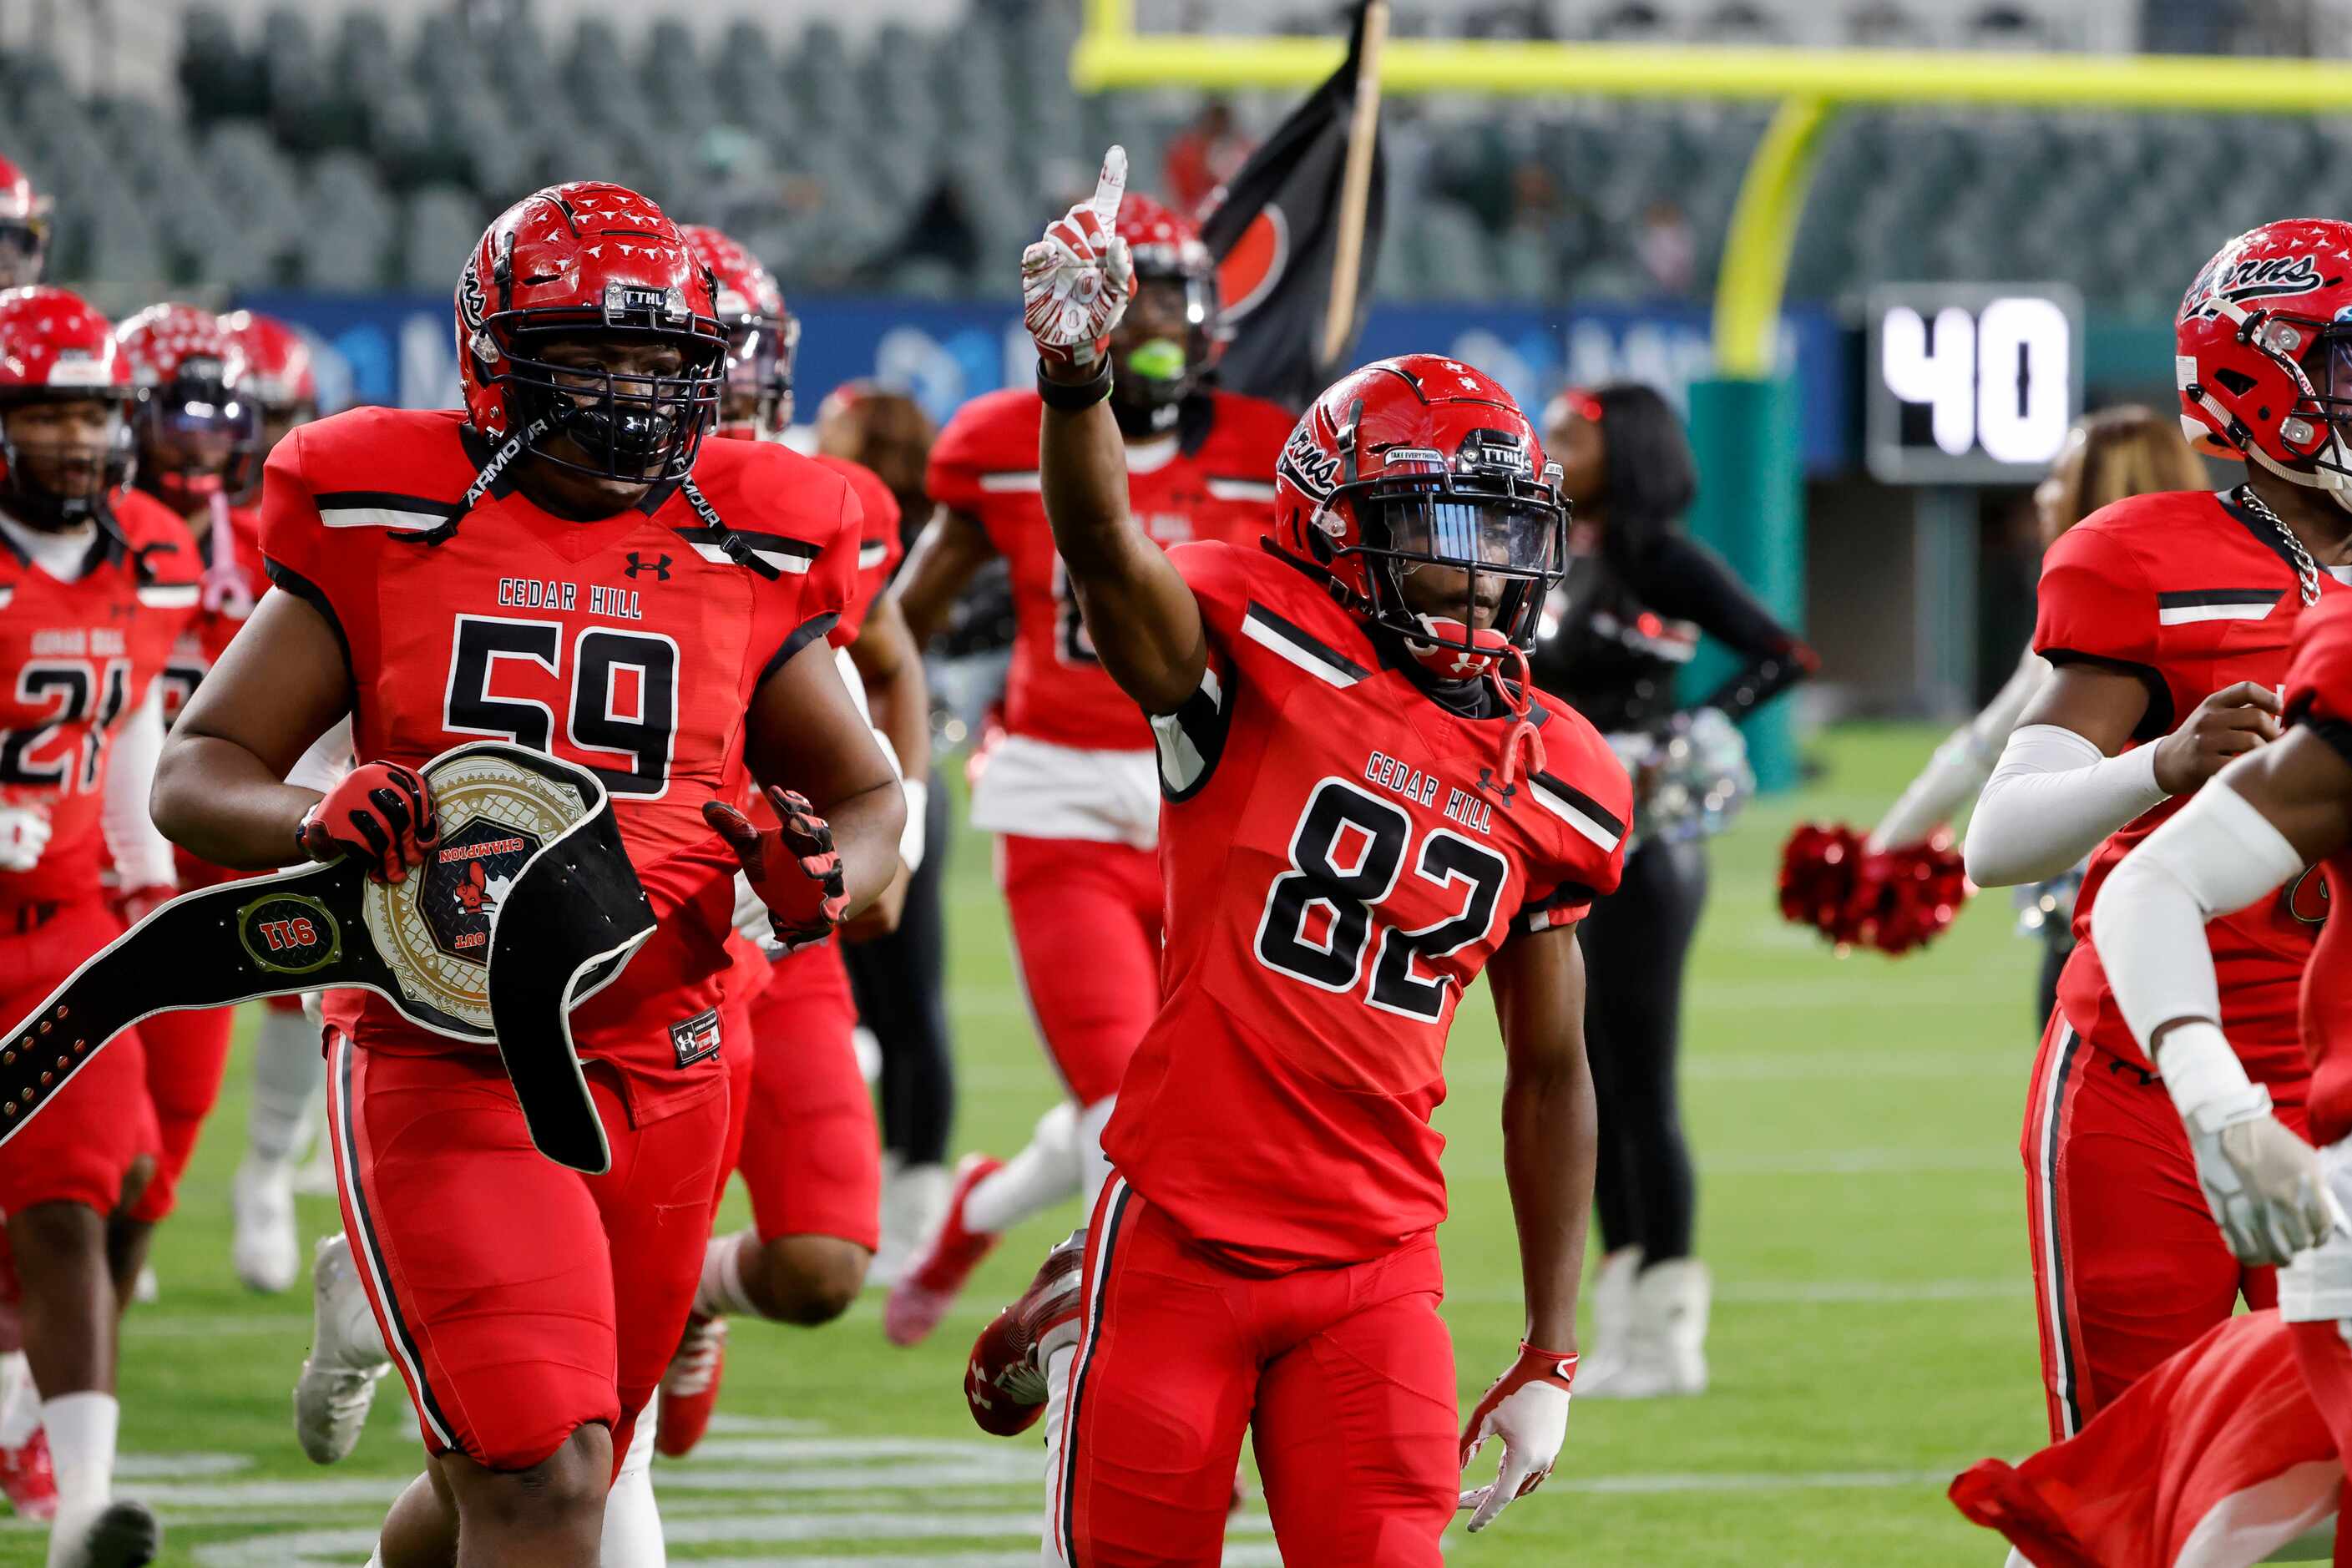 Cedar Hill’s Kason Anderson (59) and Jaylen Robinson (82) enter the field prior to playing...